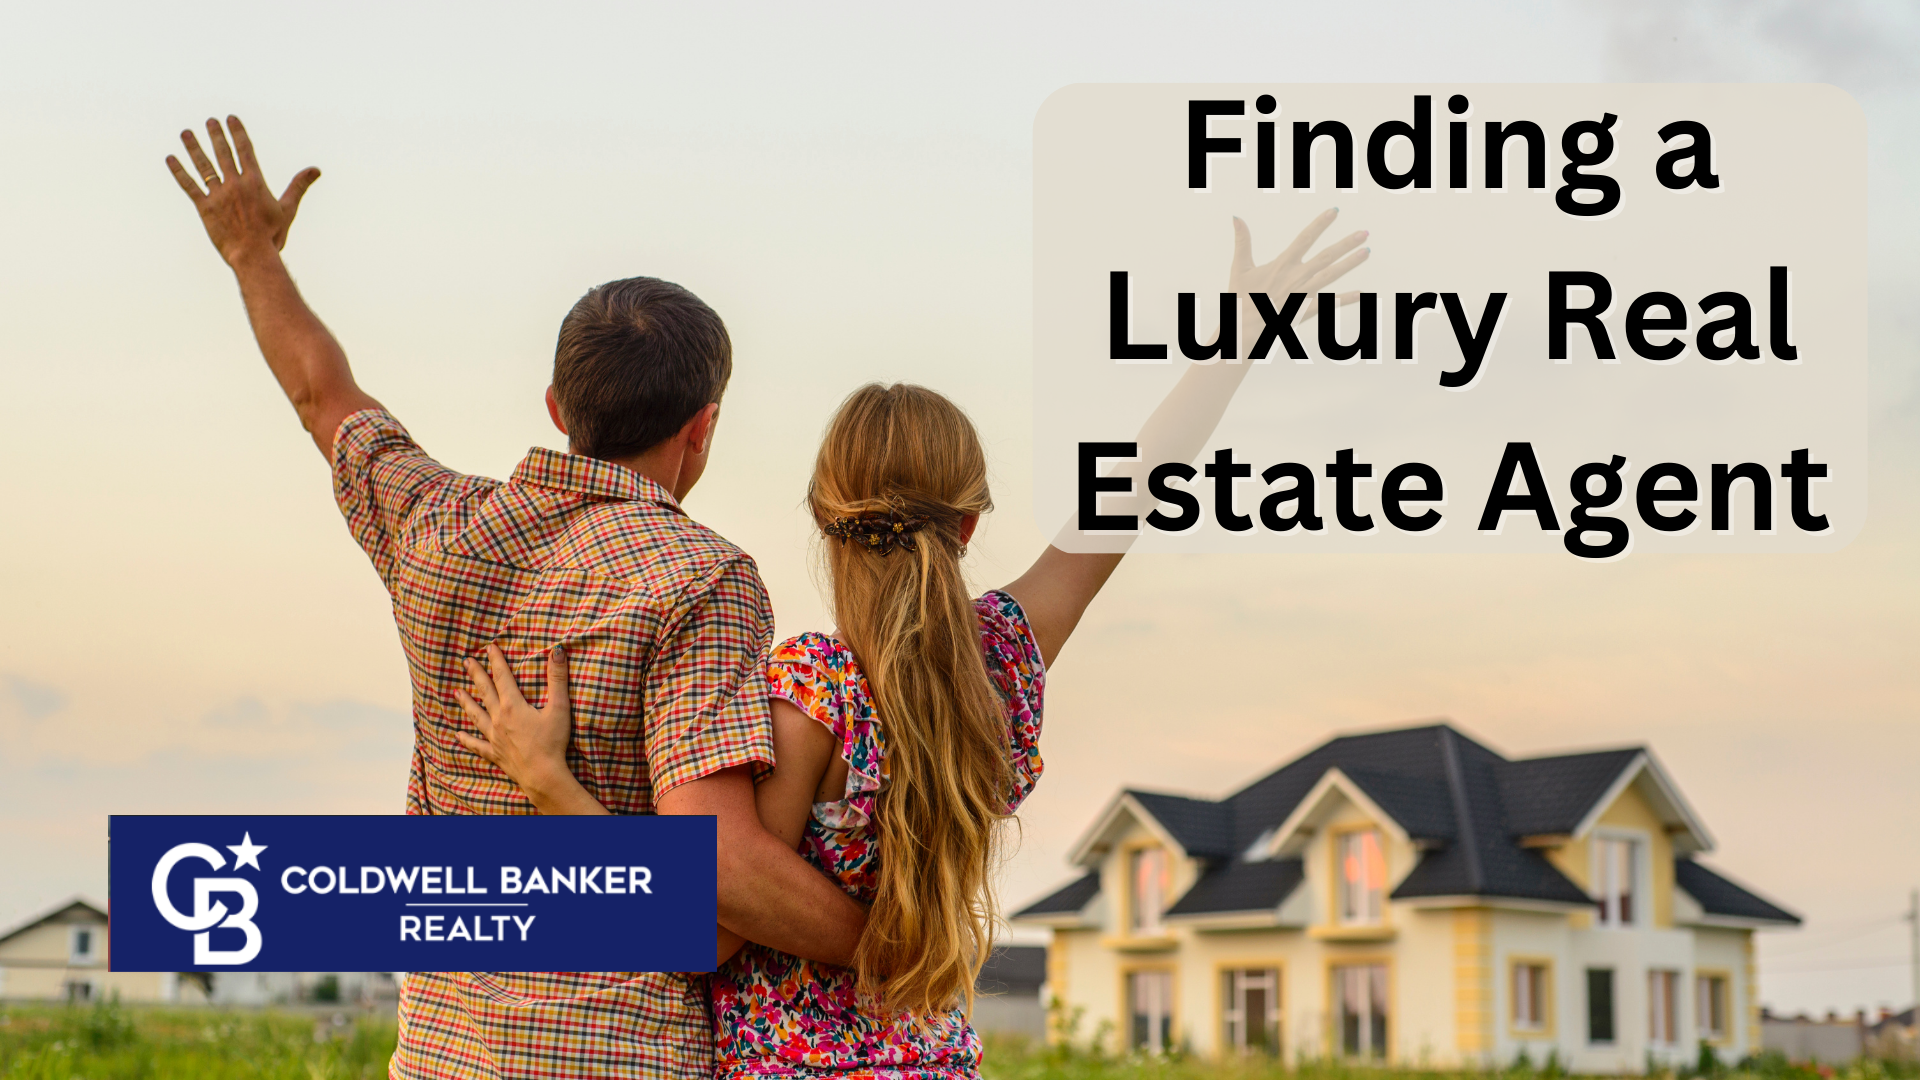 Finding a Luxury Real Estate Agent